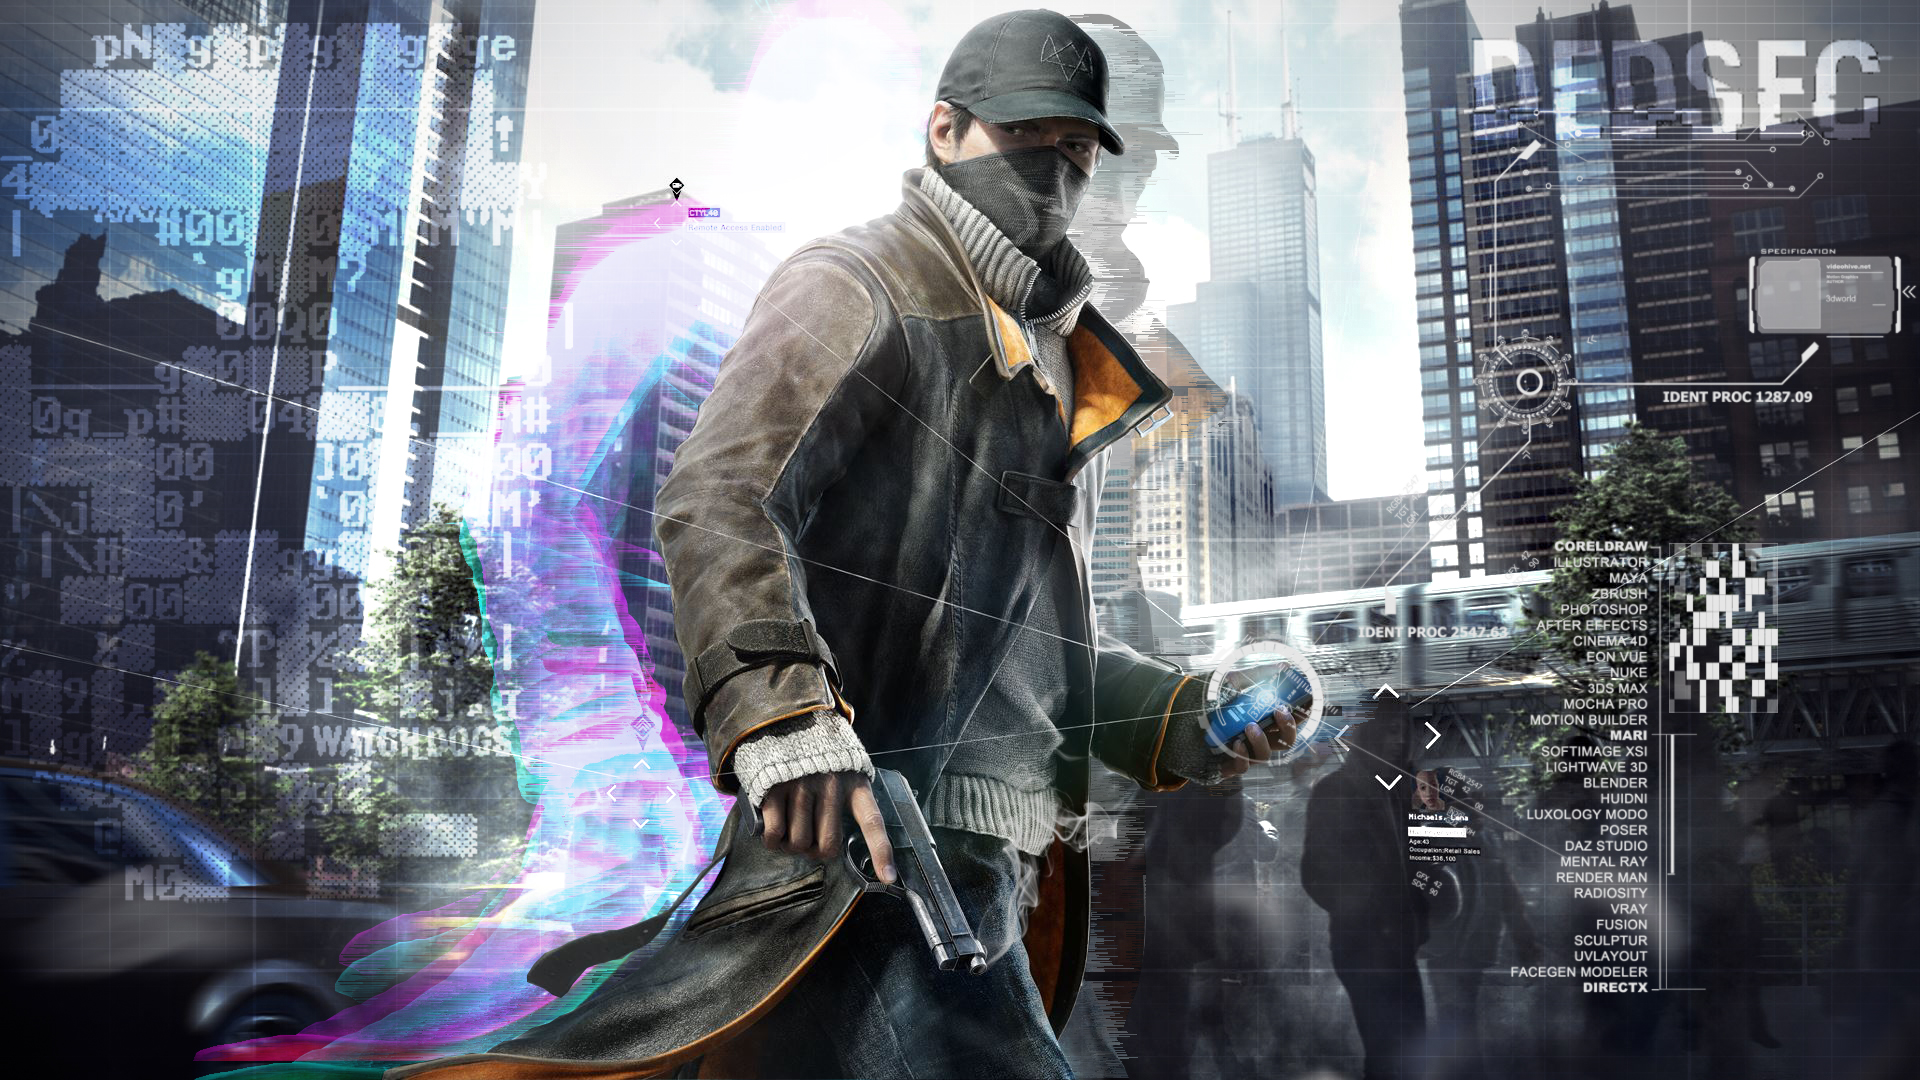 download watch dogs 2 pc update